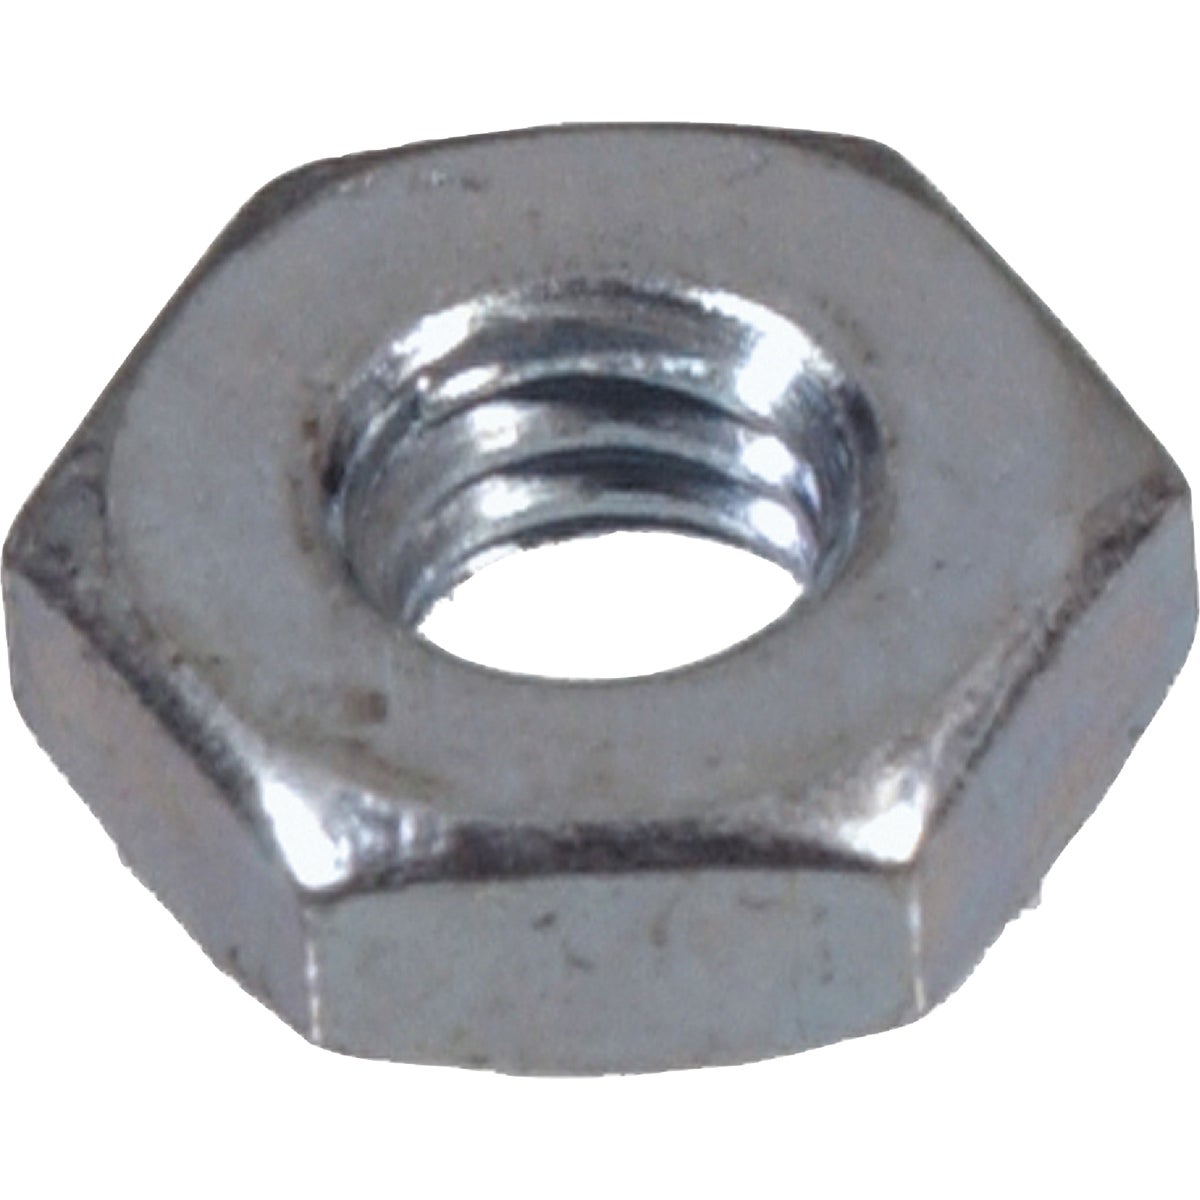 Item 710156, Coarse Machine Screw Nuts are hex nuts specifically designed to secure 